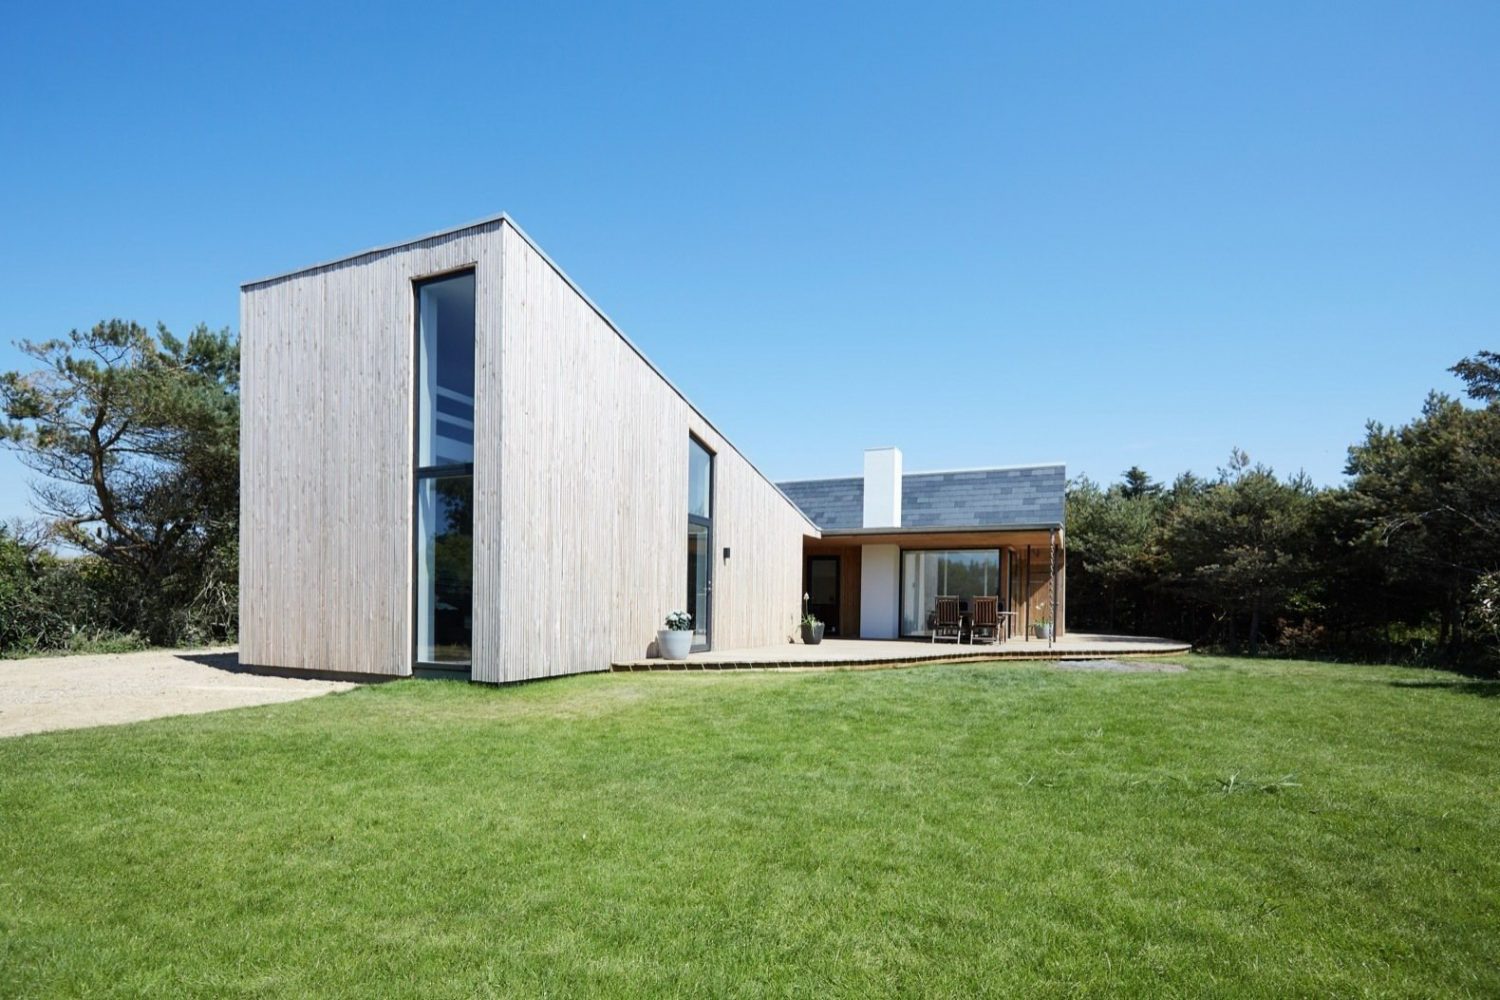 Woodhouse – Holiday Home by Puras Architects